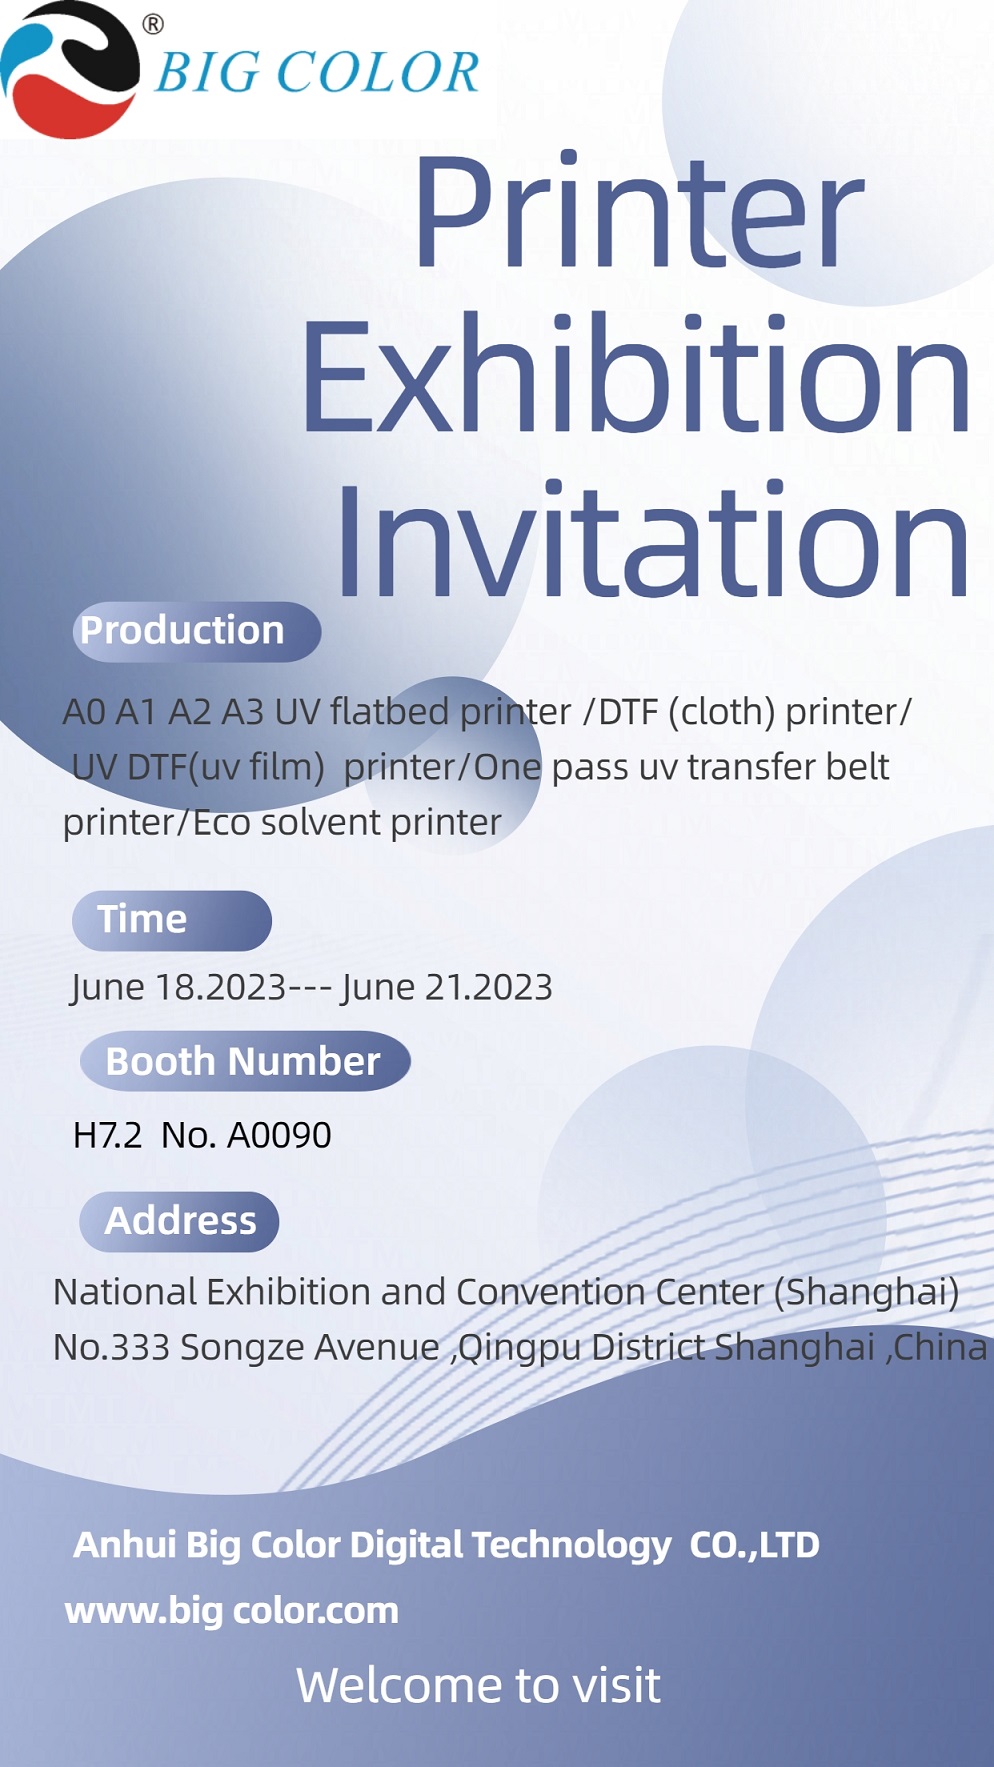 APPP EXPO(SHANGHAI) 2023  WELCOME TO JOIN US